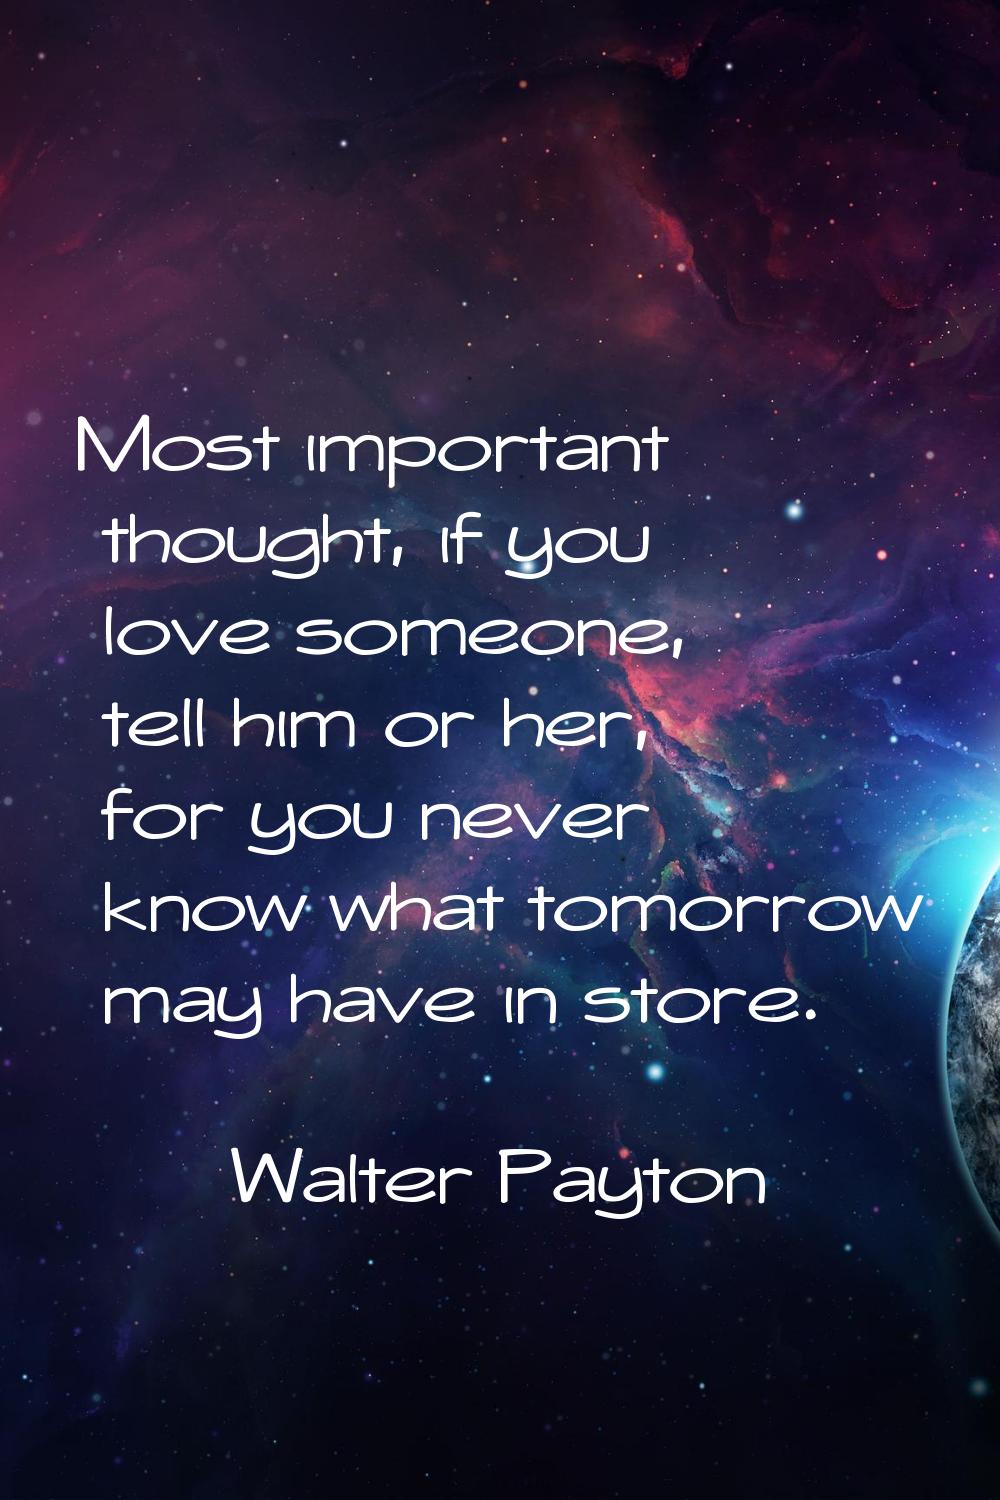 Most important thought, if you love someone, tell him or her, for you never know what tomorrow may 